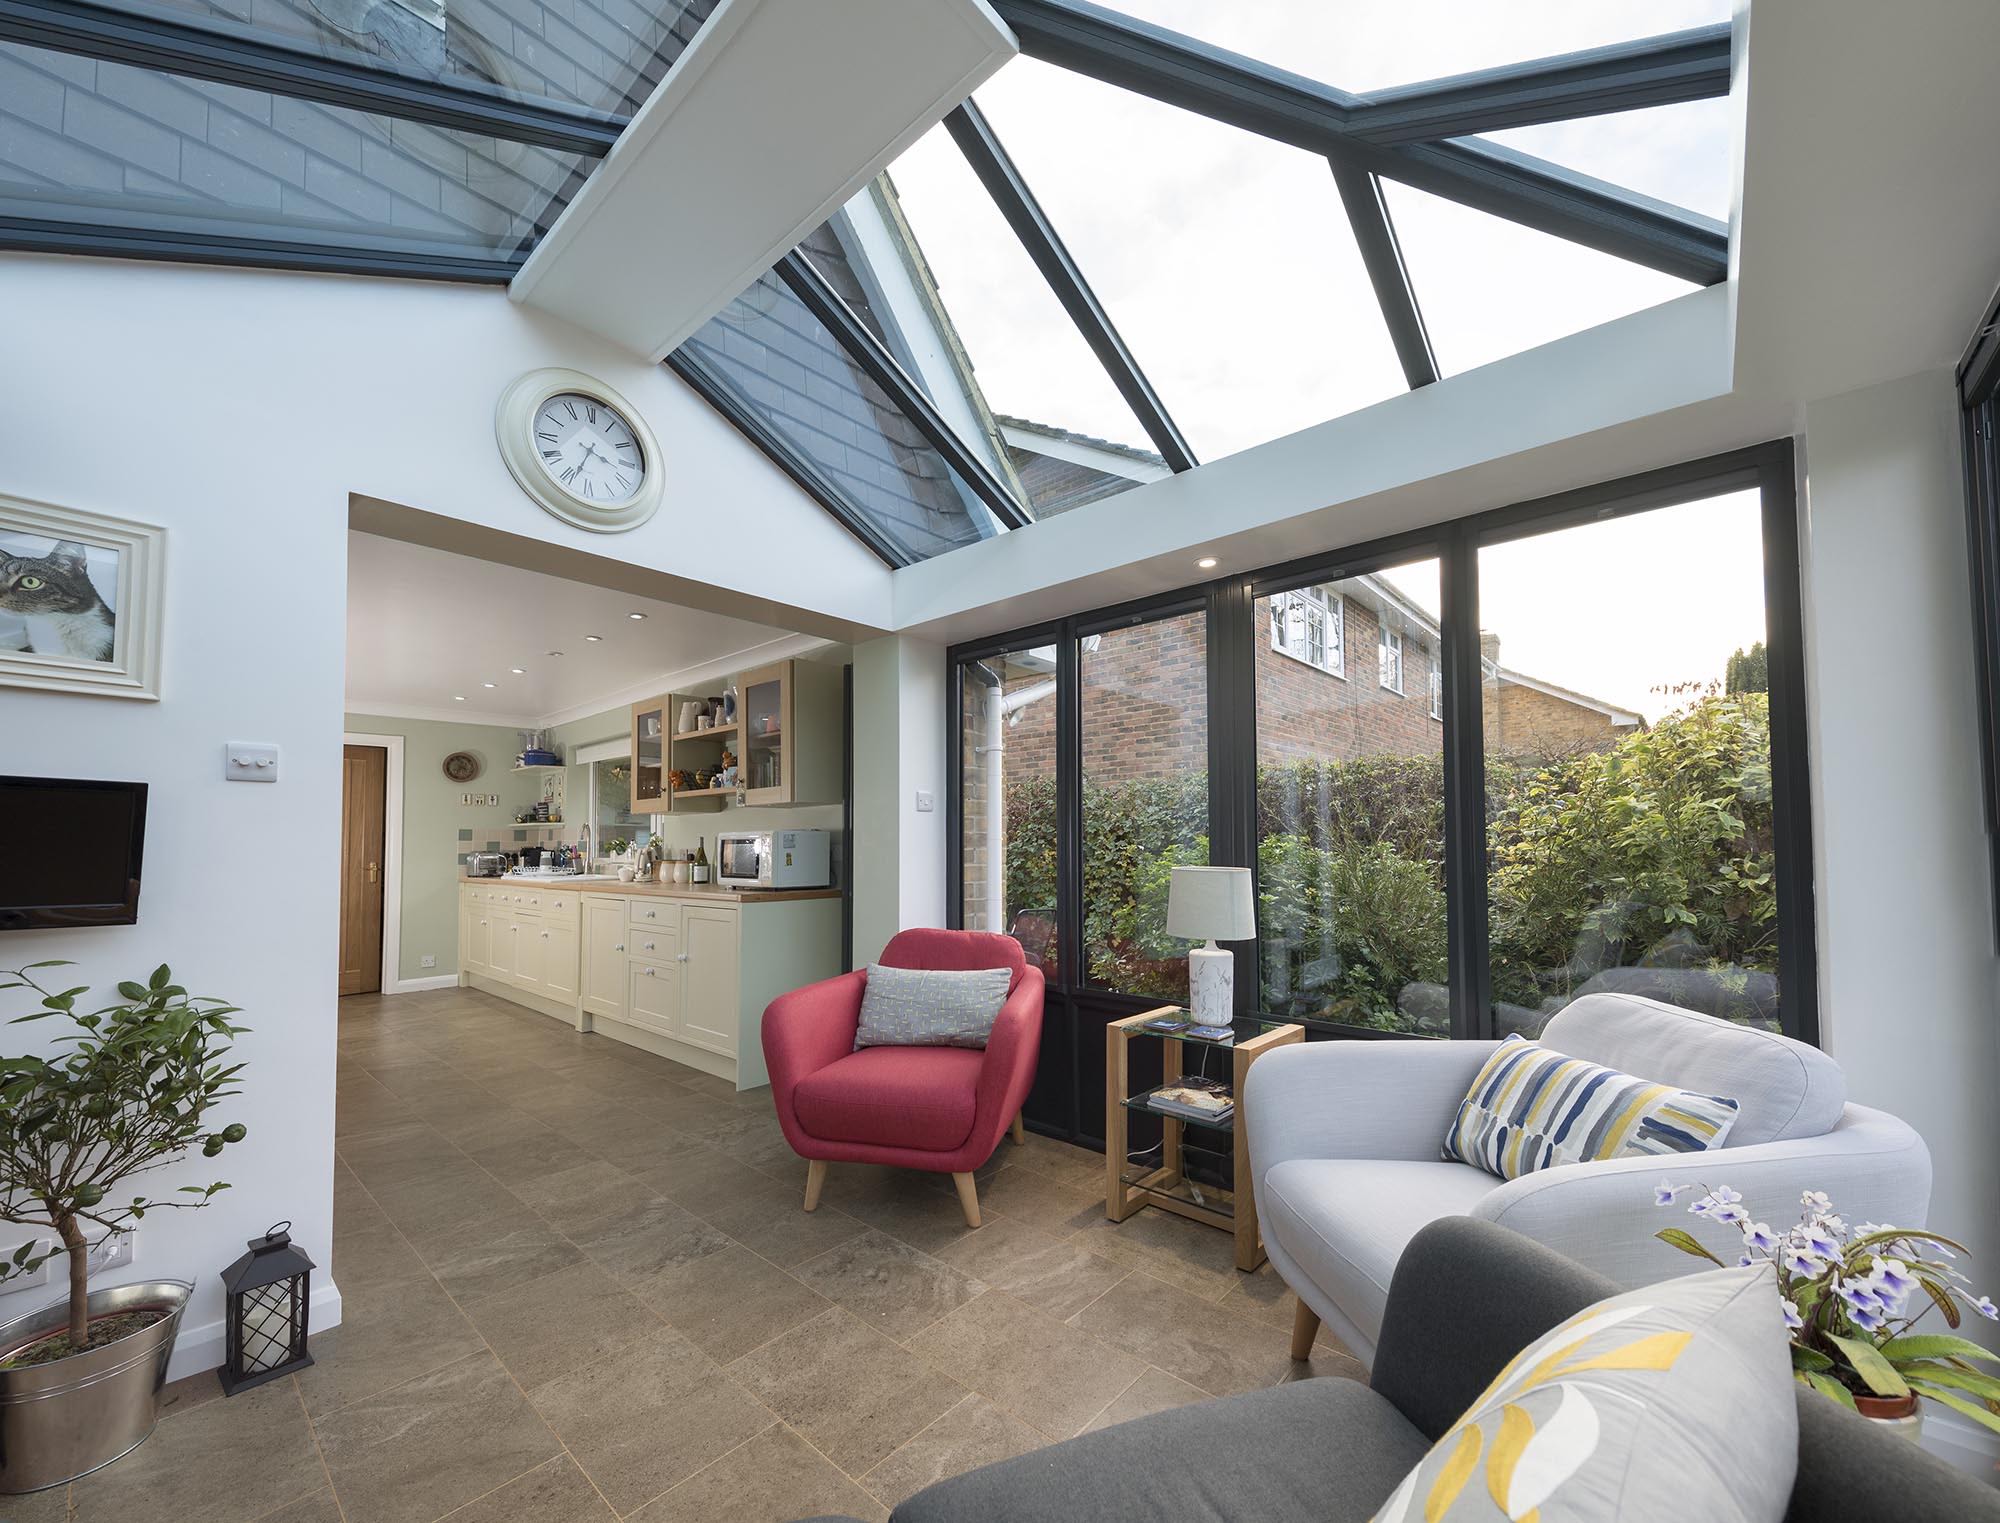 An elegant glass-to-floor conservatory with extensive transparent panels reaching down to the ground, providing an uninterrupted view of the garden and maximizing natural light, creating a bright and immersive indoor-outdoor experience